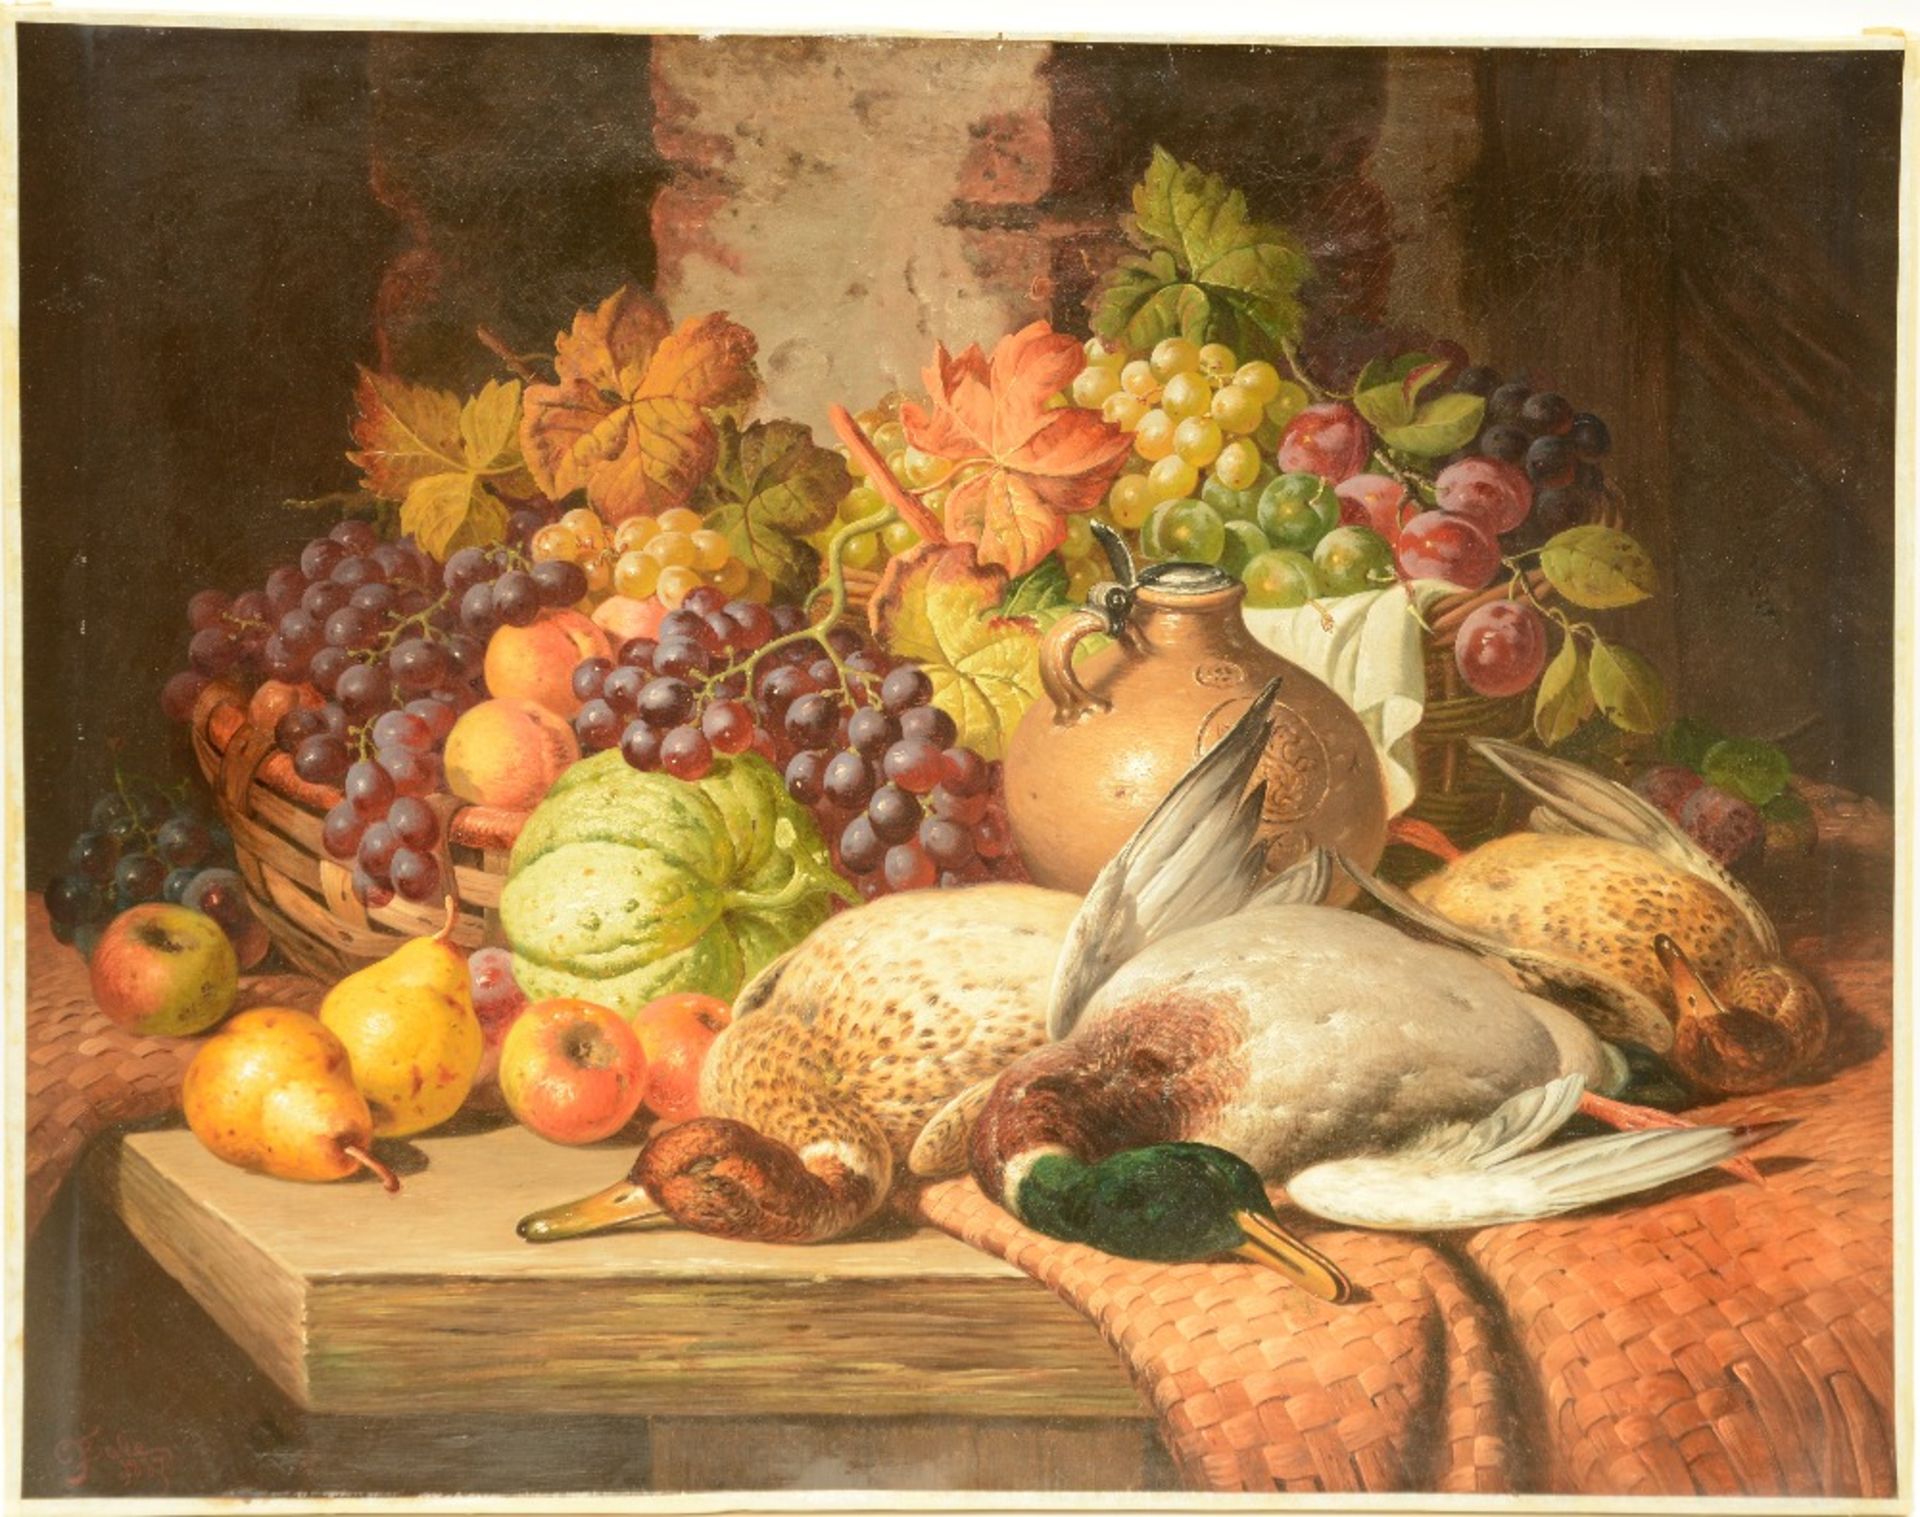 Bale Th., a still life with fruits and birds, oil on canvas, dated 1887, 71 x 92 cm